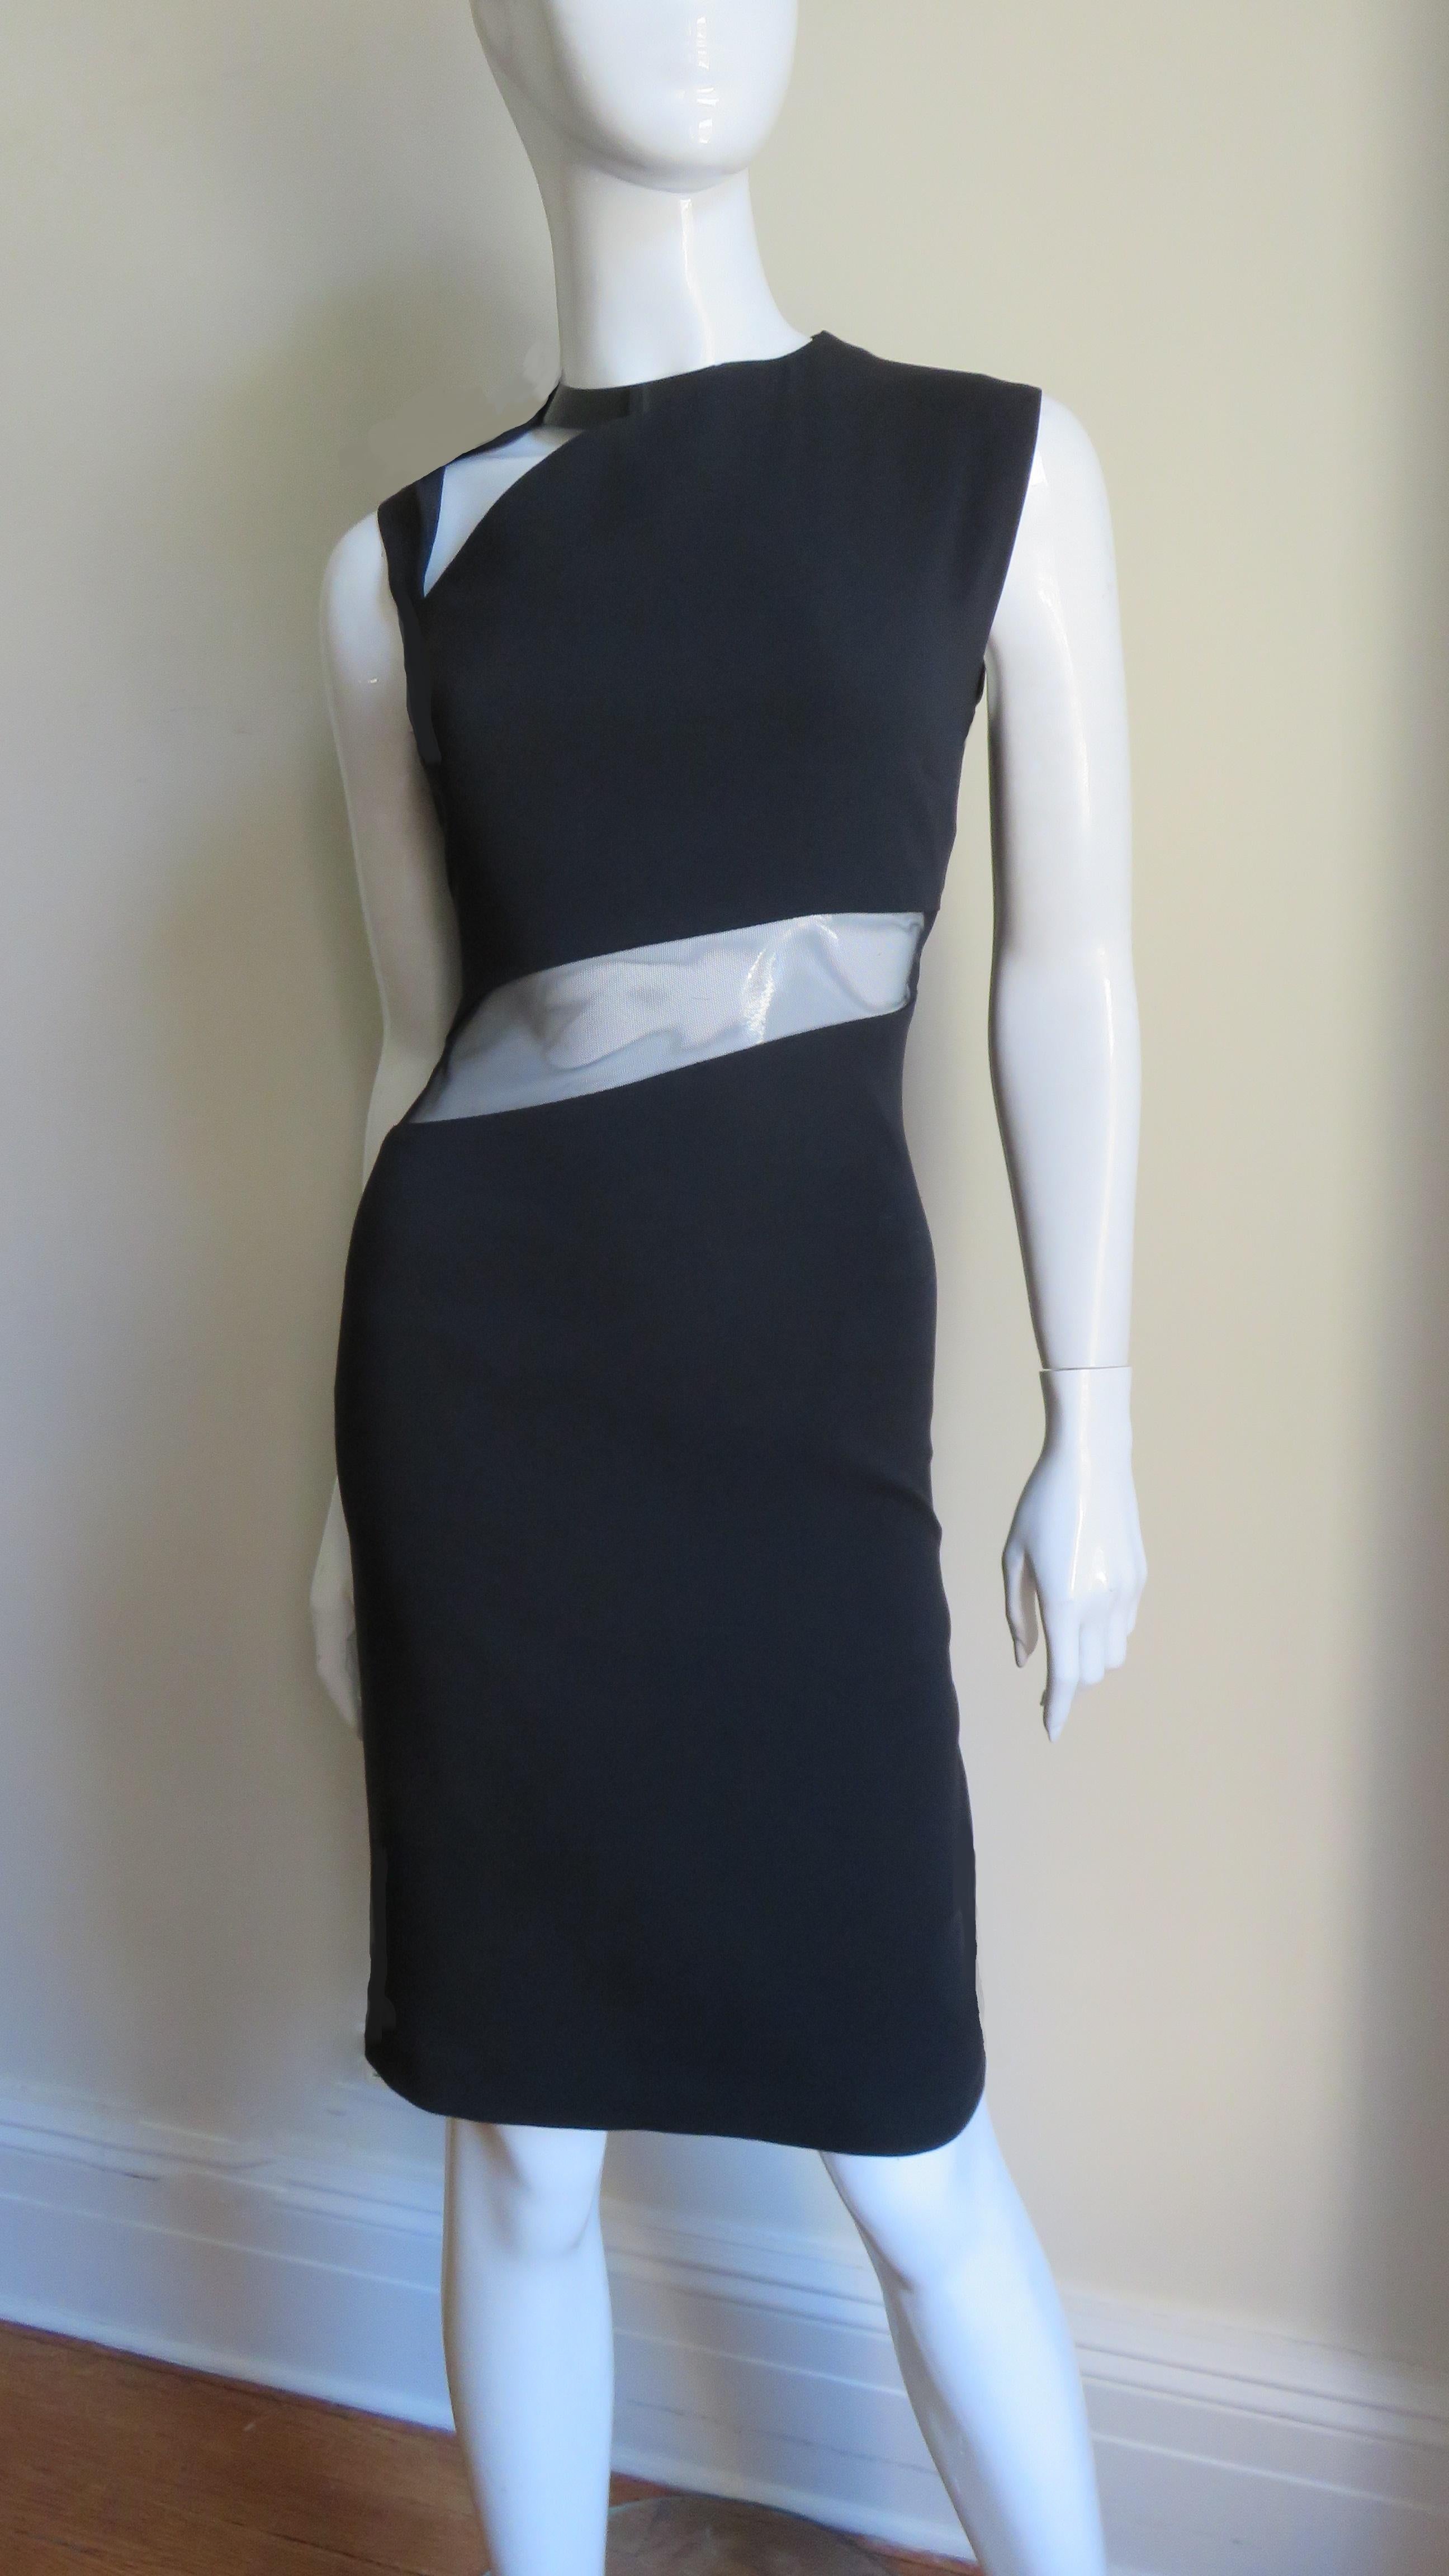 A fabulous black silk dress from Gucci.  It is semi fitted with a black metal collar with a cut out below it and another cut out diagonally across the front waist covered in black mesh.  The skirt is straight, there is a matching back invisible